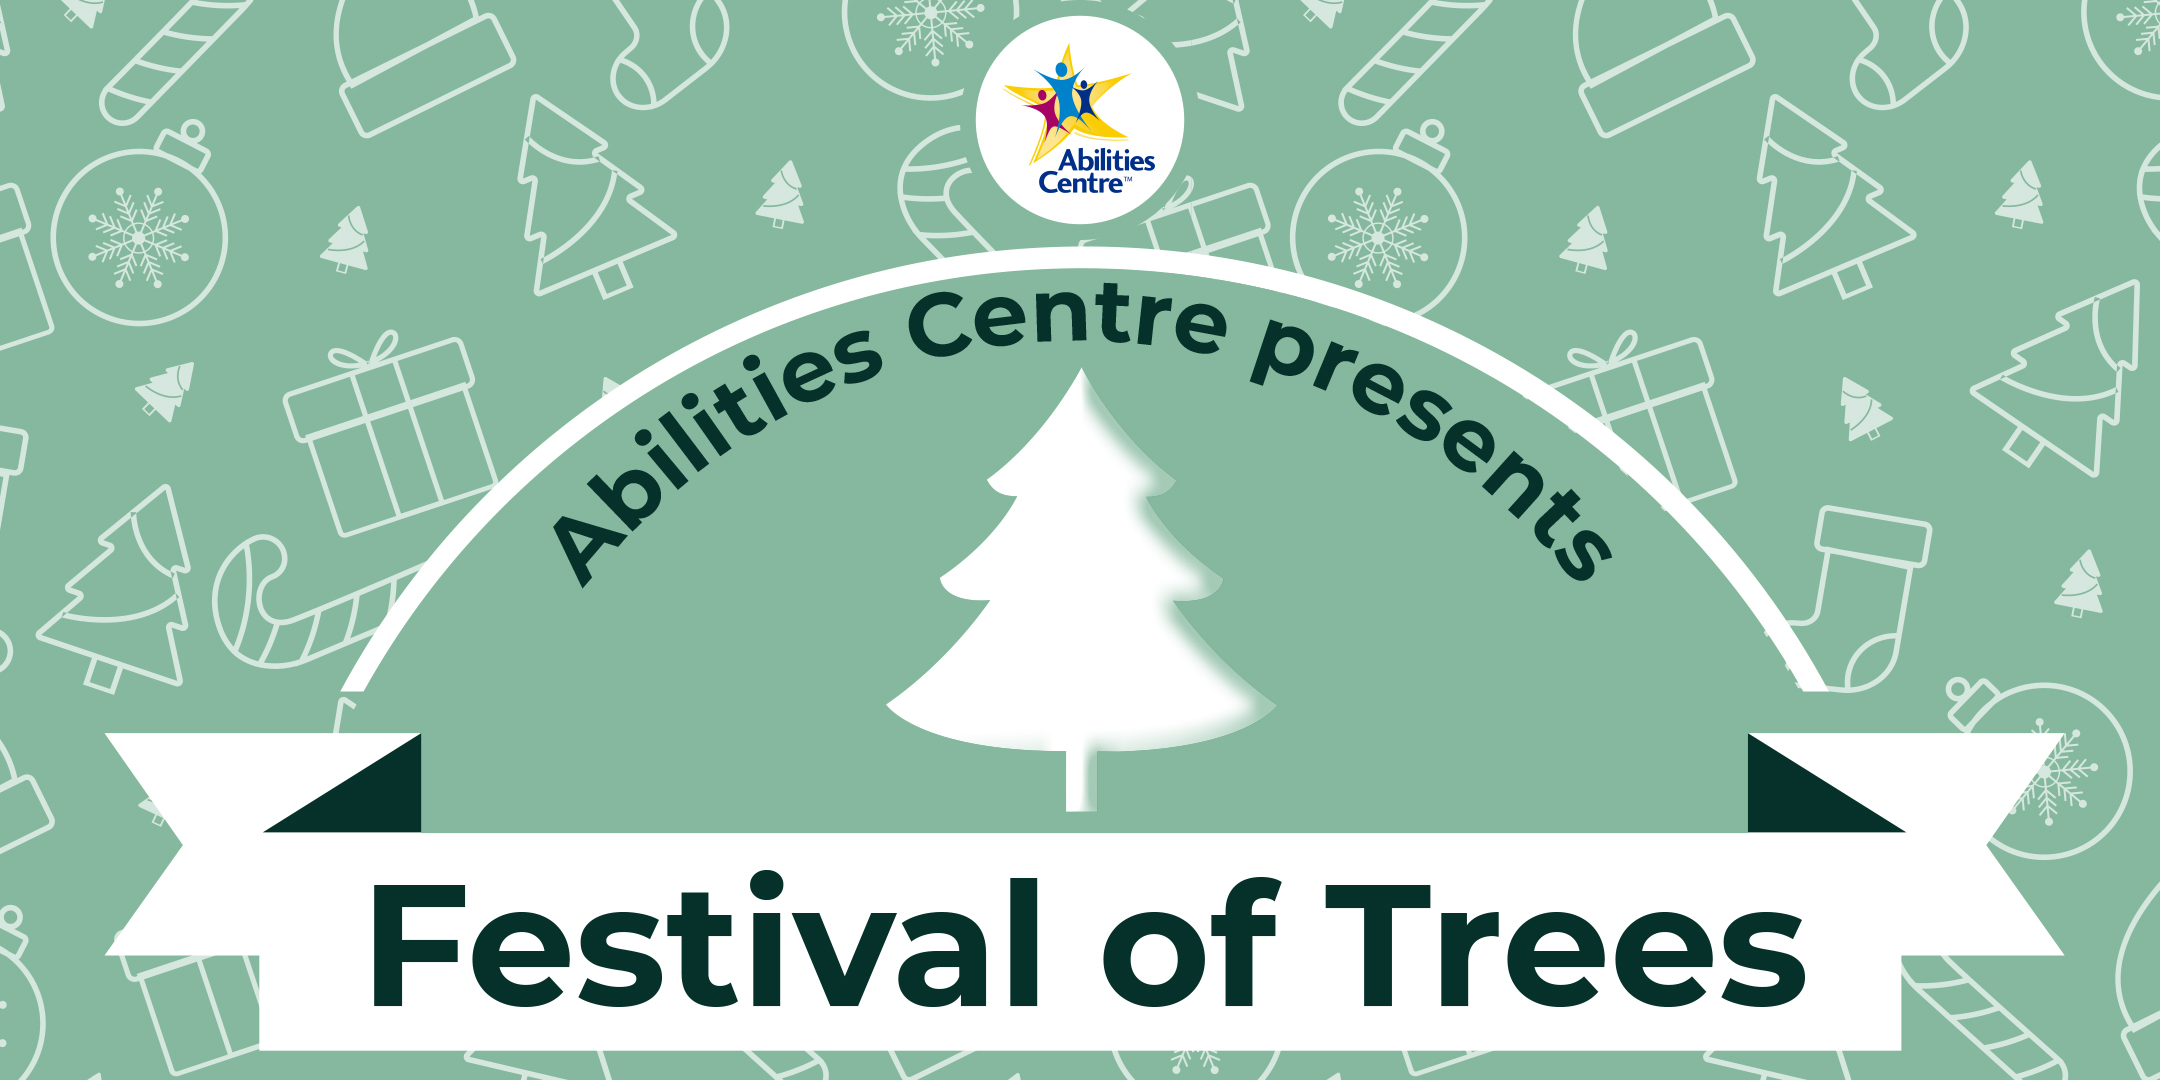 a green banner with a pattern of candy canes, christmas trees and decorations that reads abilities centre presents Festival of trees